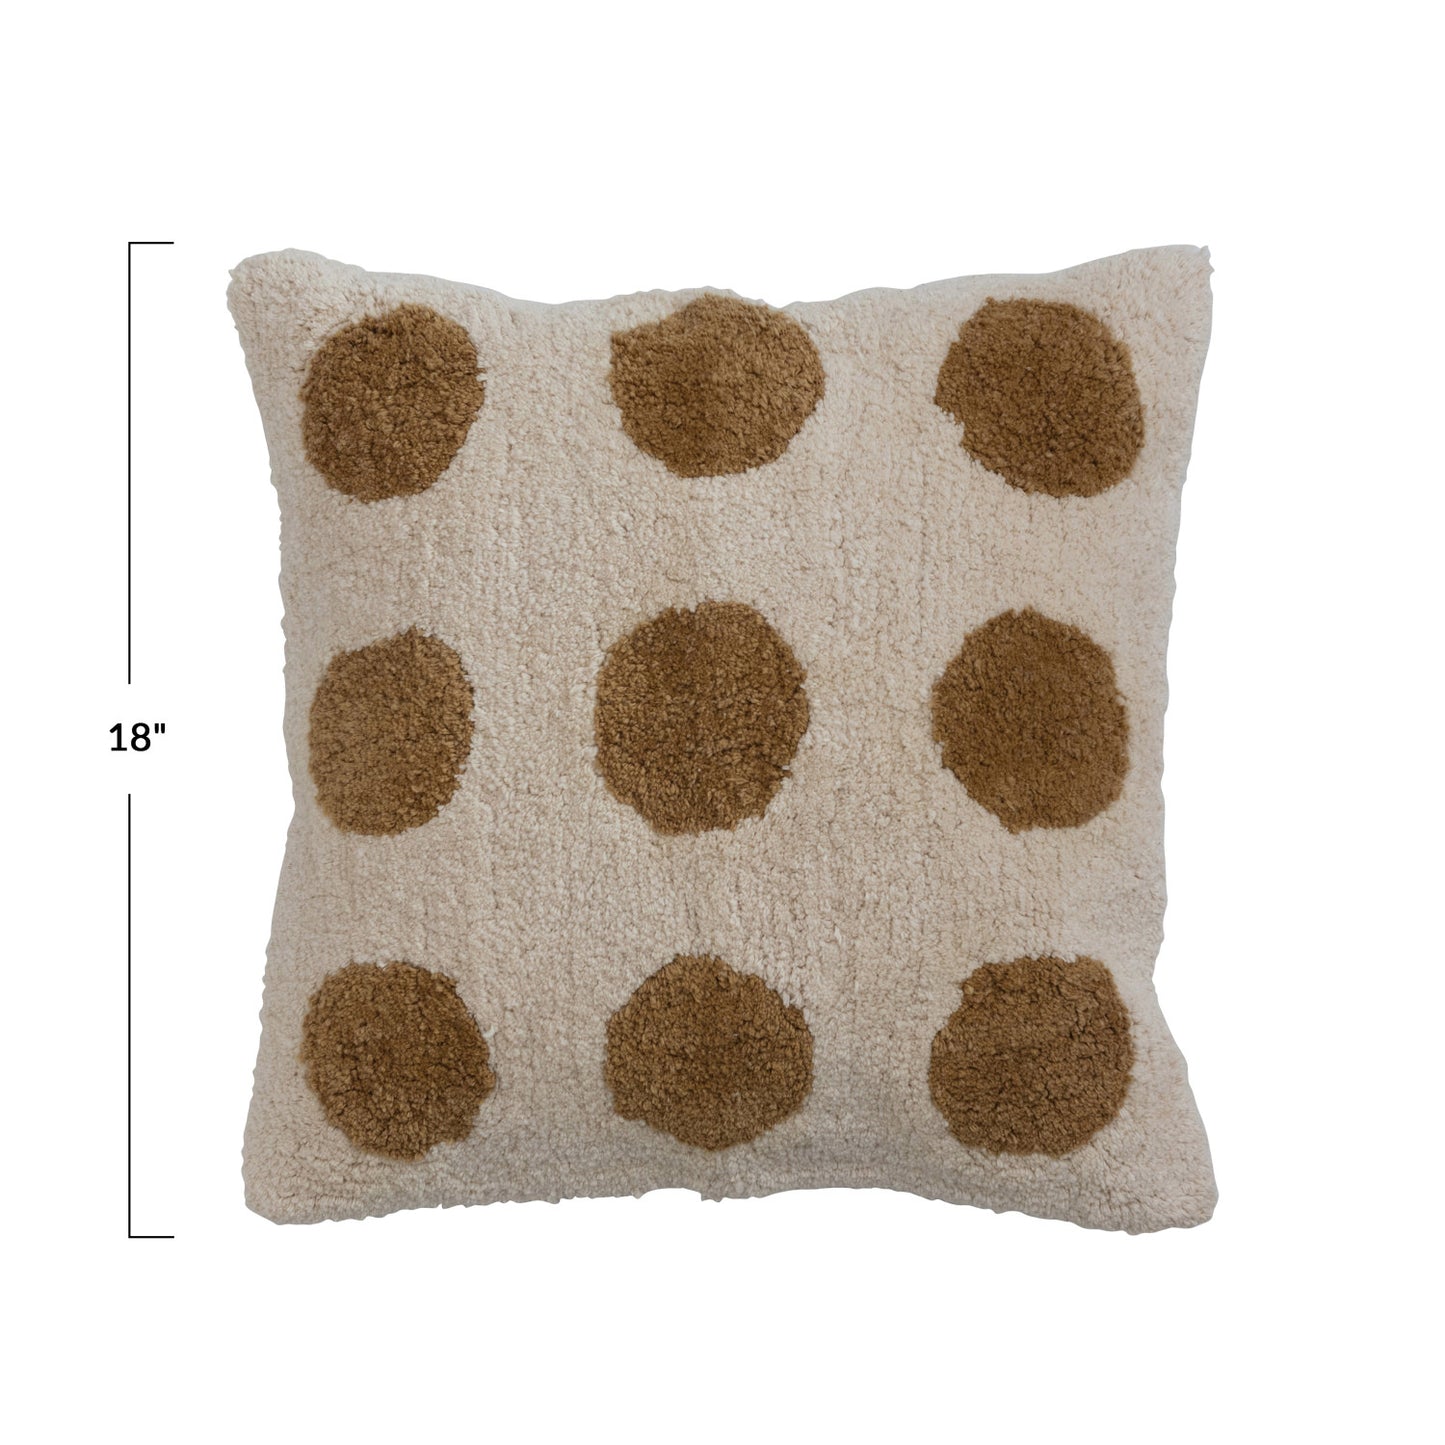 18" Cotton Tufted Pillow w/ Dots & Chambray Back, Polyester Fill